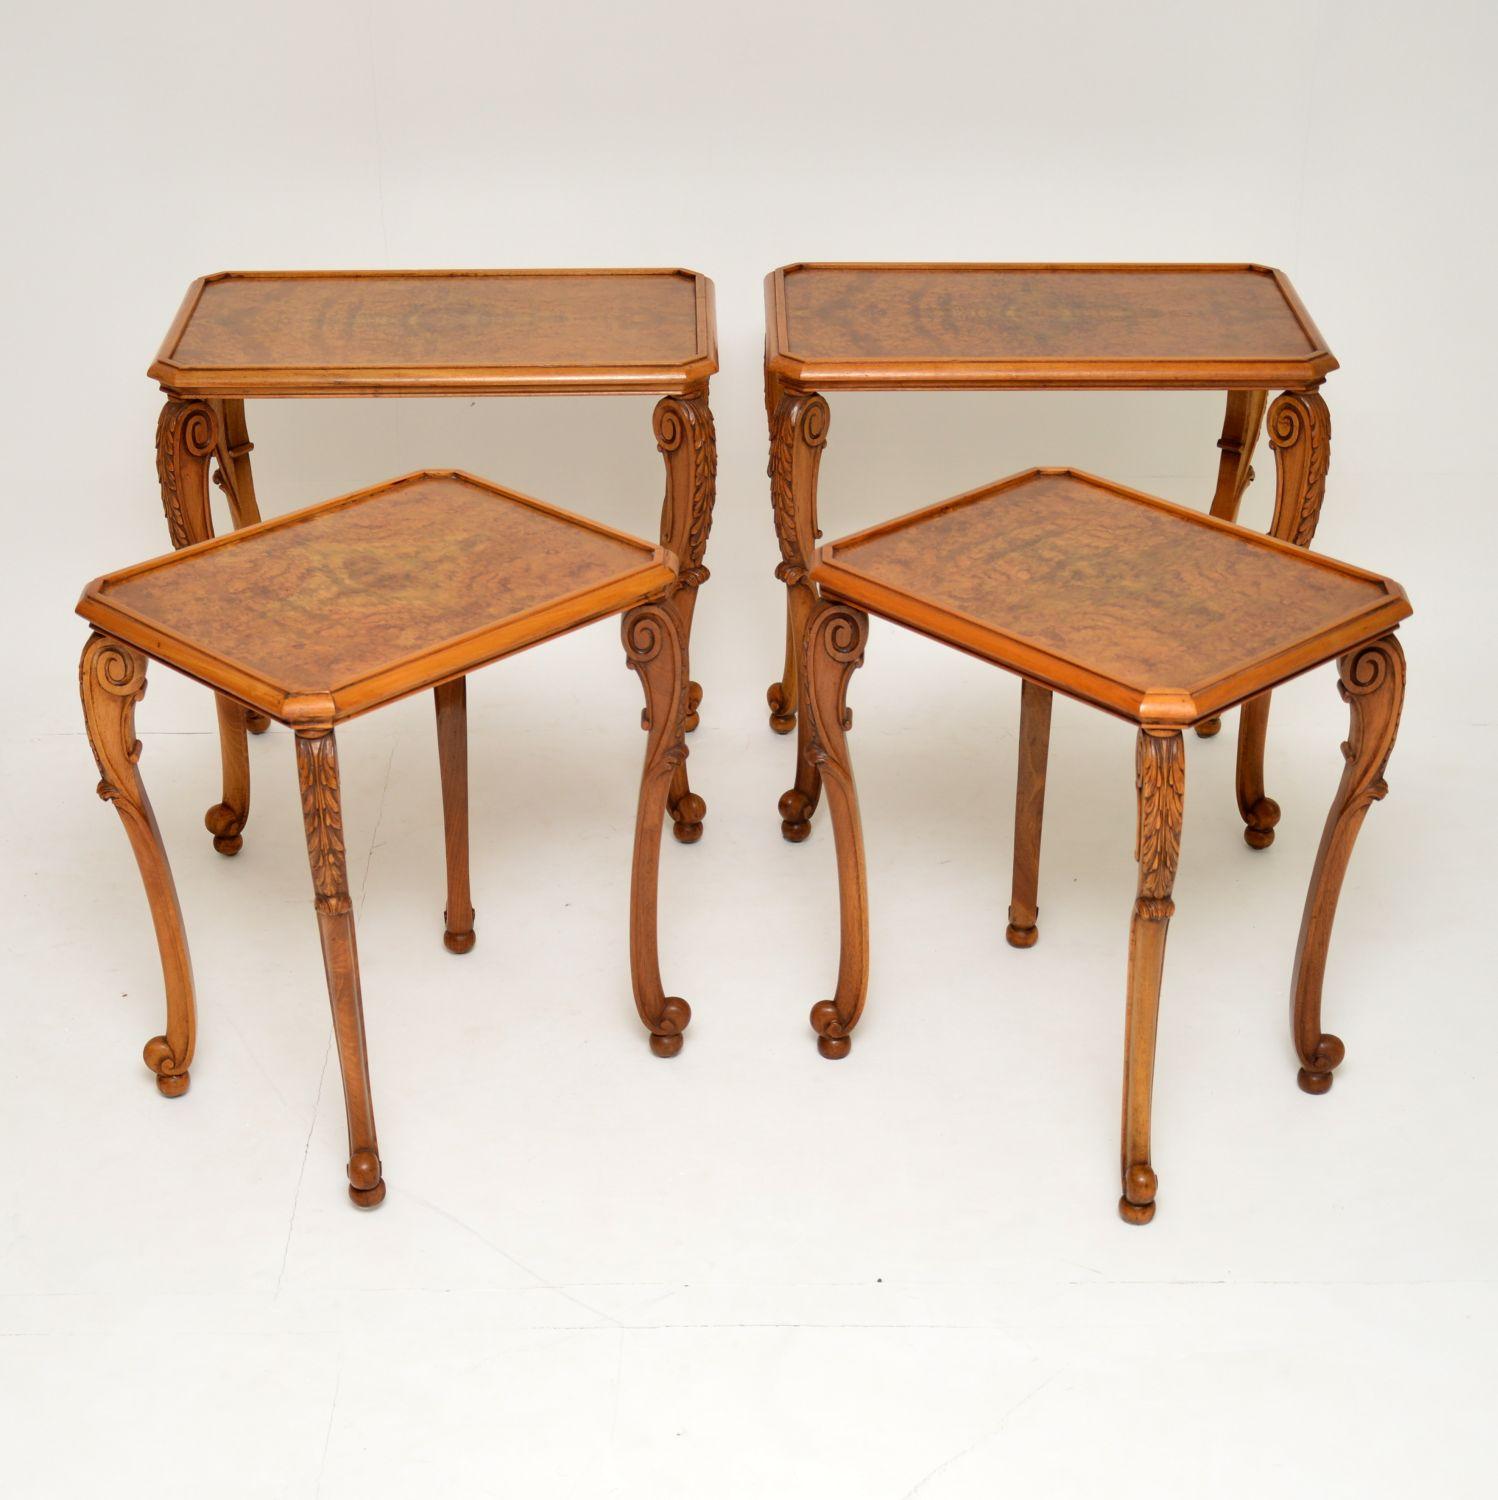 William and Mary Pair of Antique Burr Walnut Nesting Side Tables